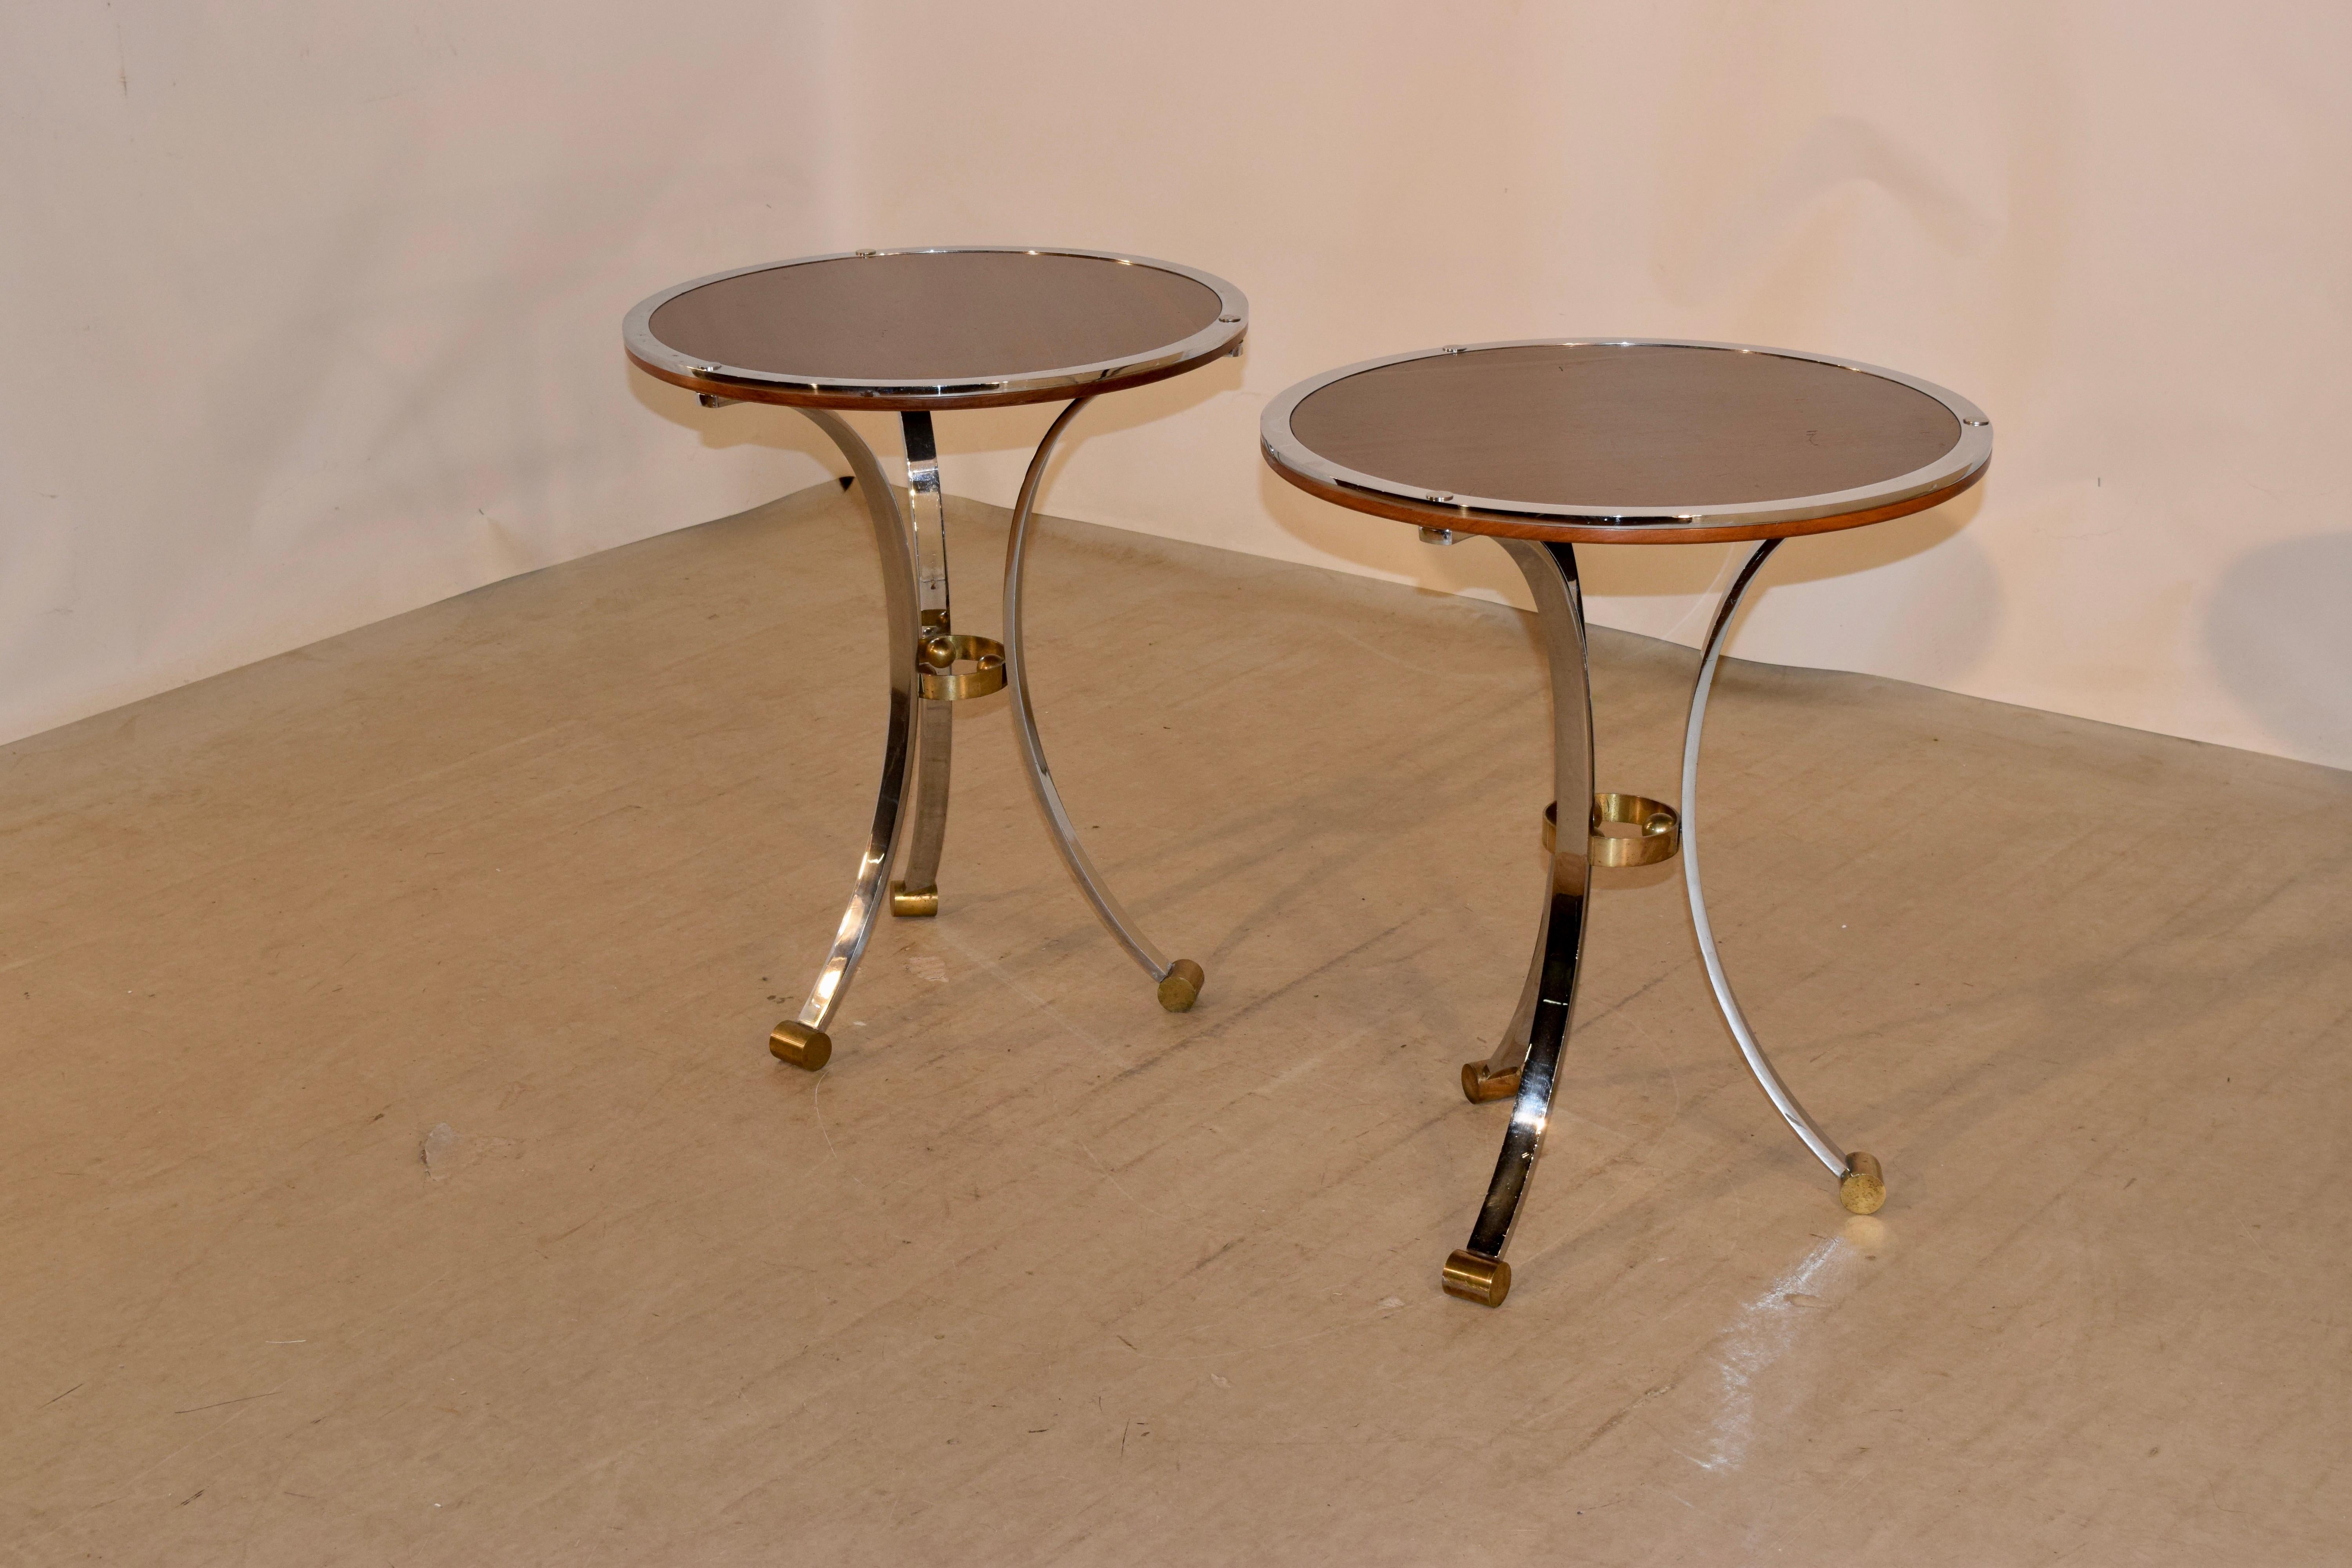 20th Century Pair of Midcentury Mahogany and Chrome Side Tables